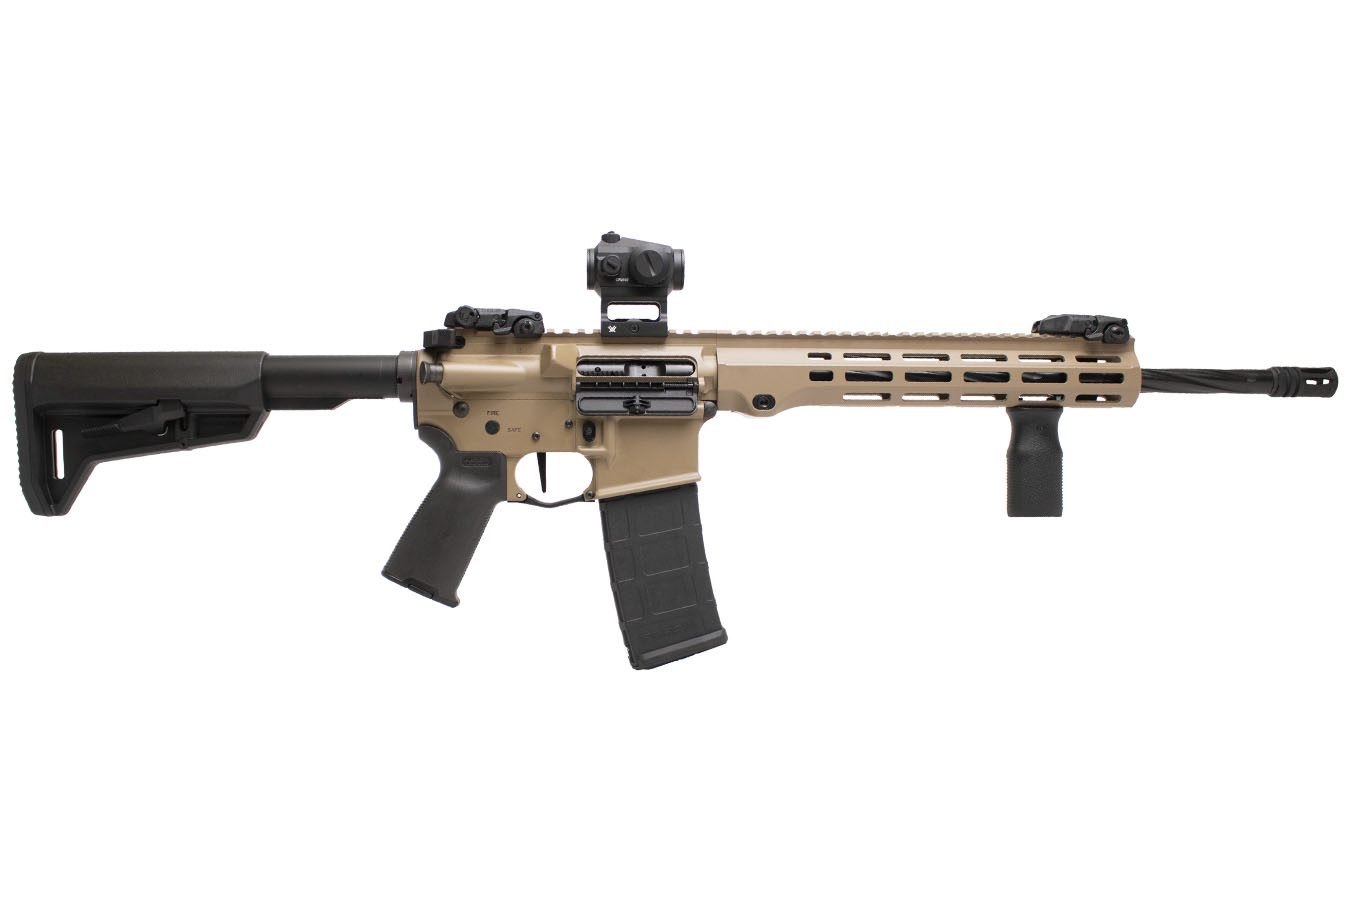 MAXIM DEFENSE MD15L 5.56mm AR-15 FDE Rifle with Vortex Crossfire Red Dot Optic